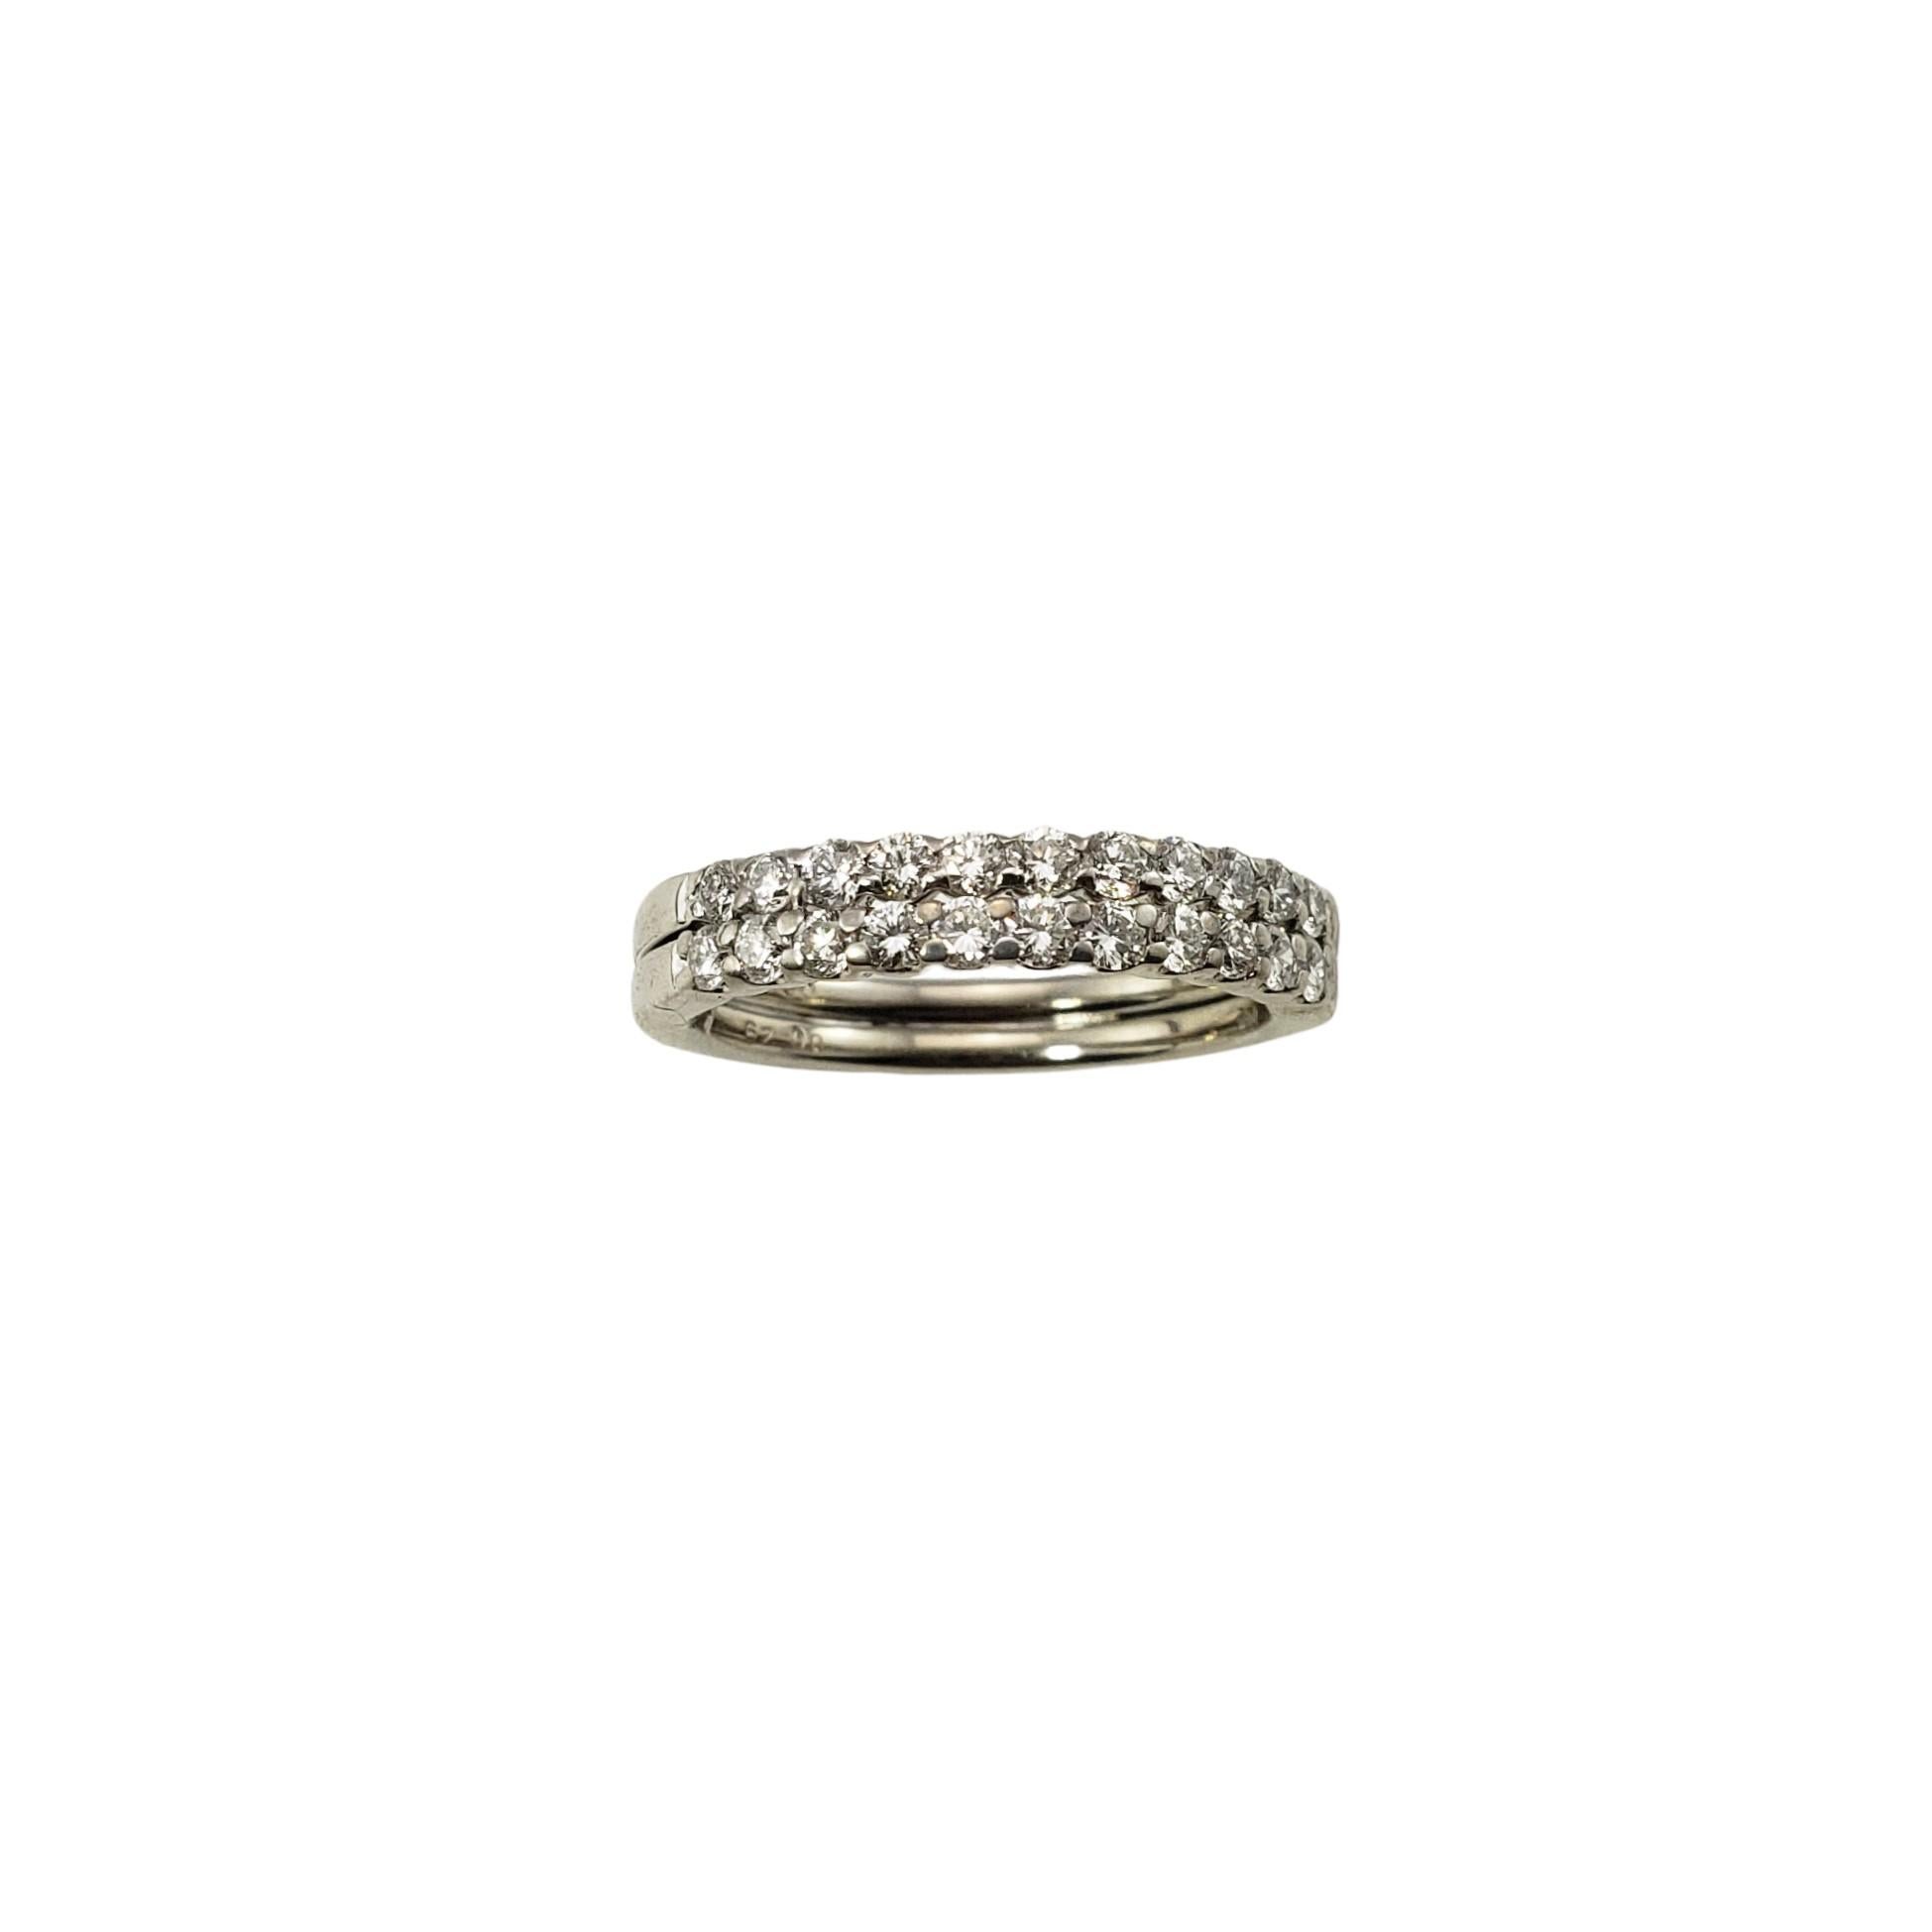 14 Karat White Gold and Diamond Double Band Ring Size 6.5-

This sparkling 14K white gold ring features 22 round brilliant cut diamonds set in a fixed double band setting.  Width:  4 mm.
Shank:  3 mm.

Approximate total diamond weight:  .58